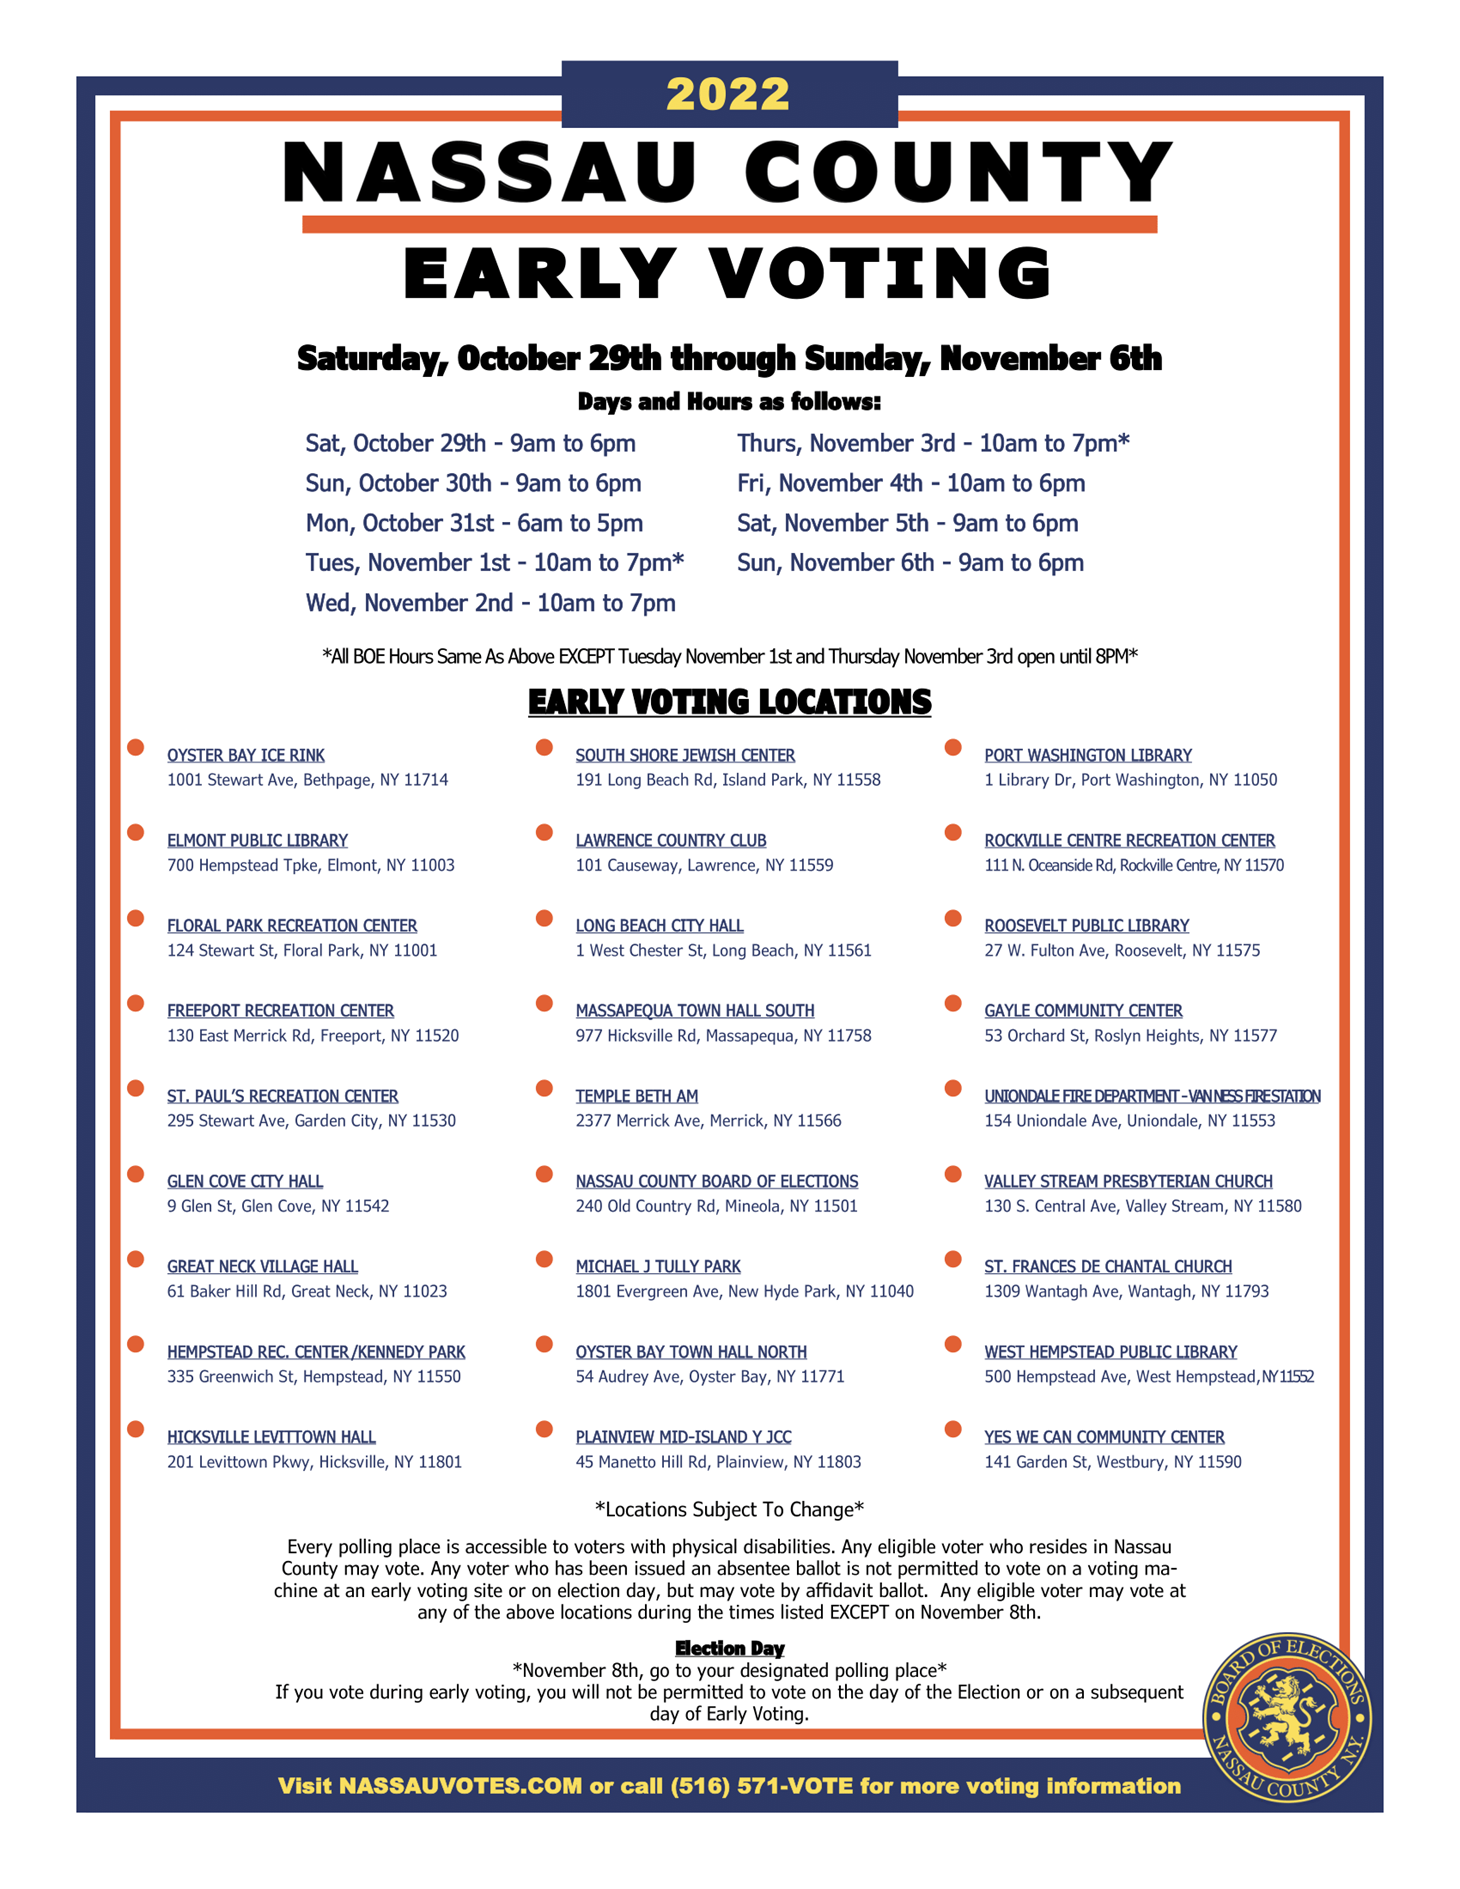 Nassau County Early Voting Locations